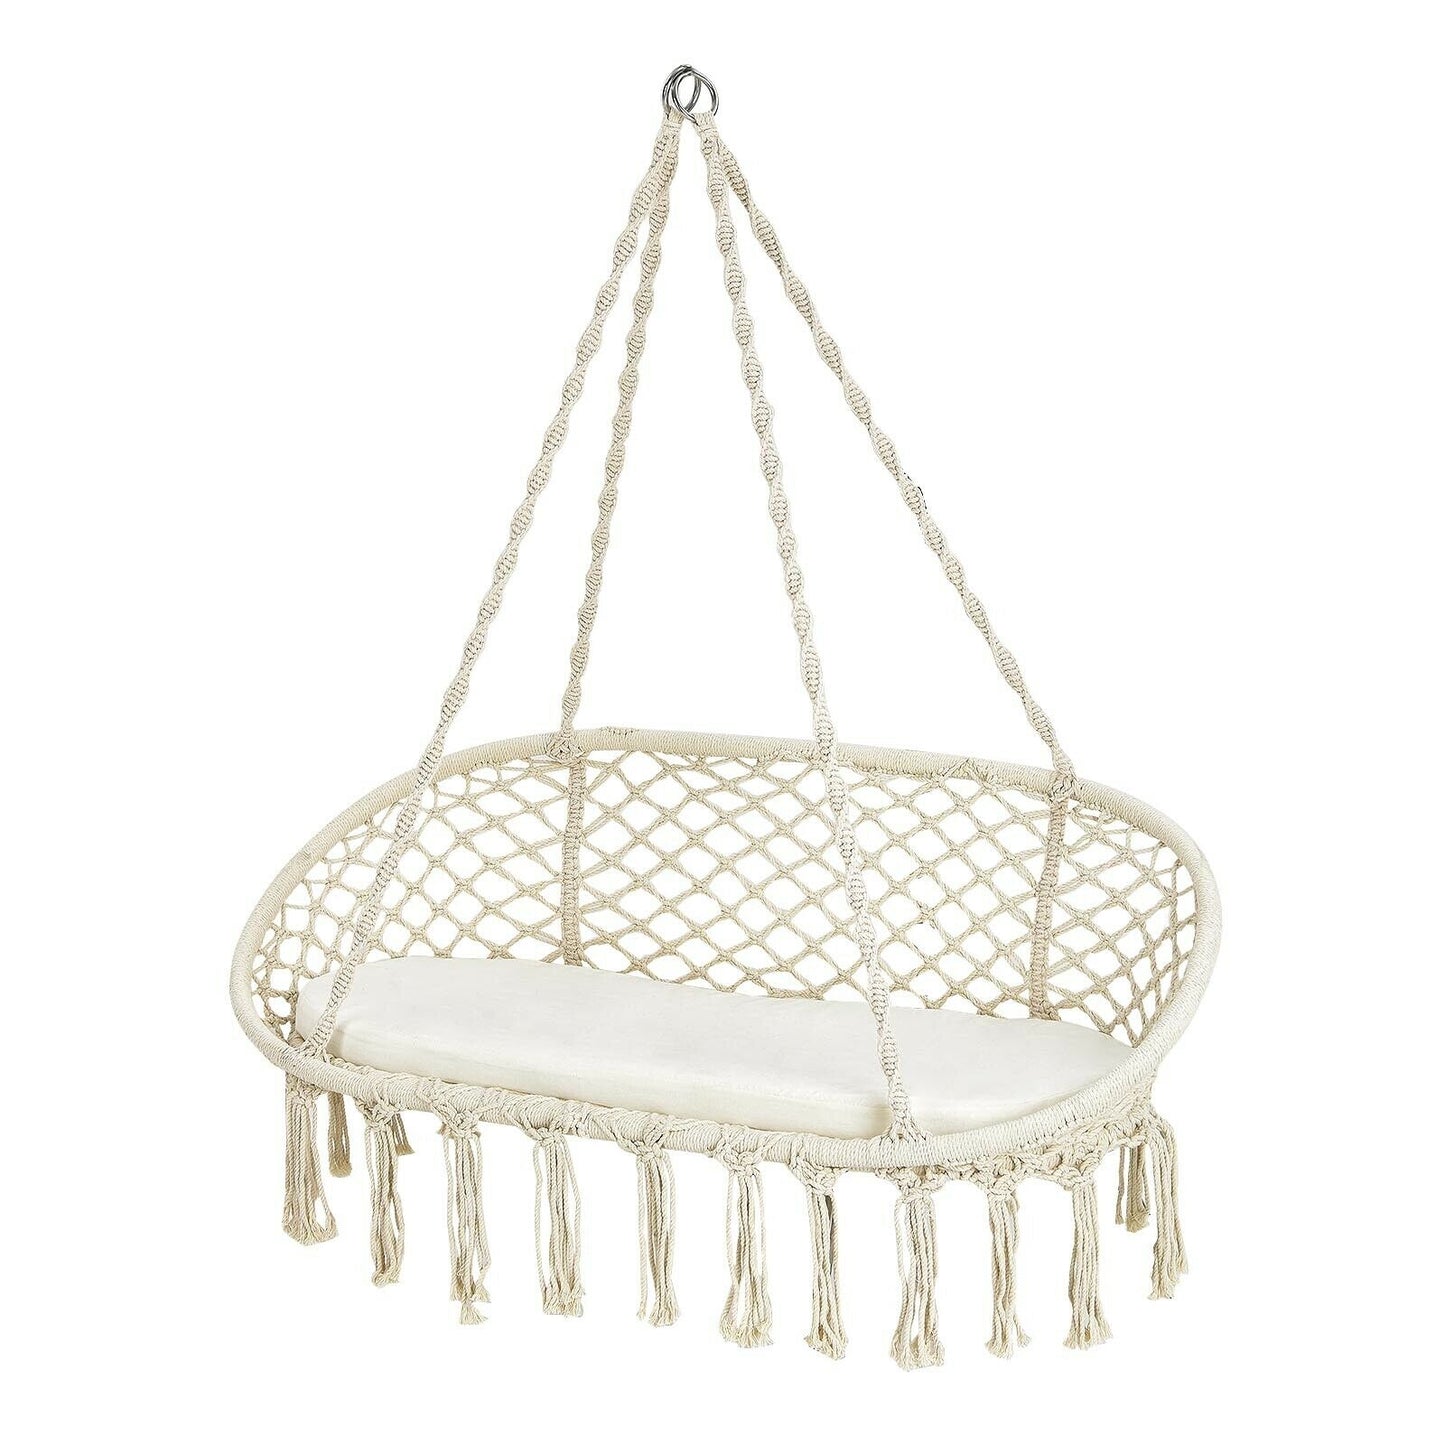 2 Person Hanging Hammock Chair with Cushion Macrame Swing-Beige